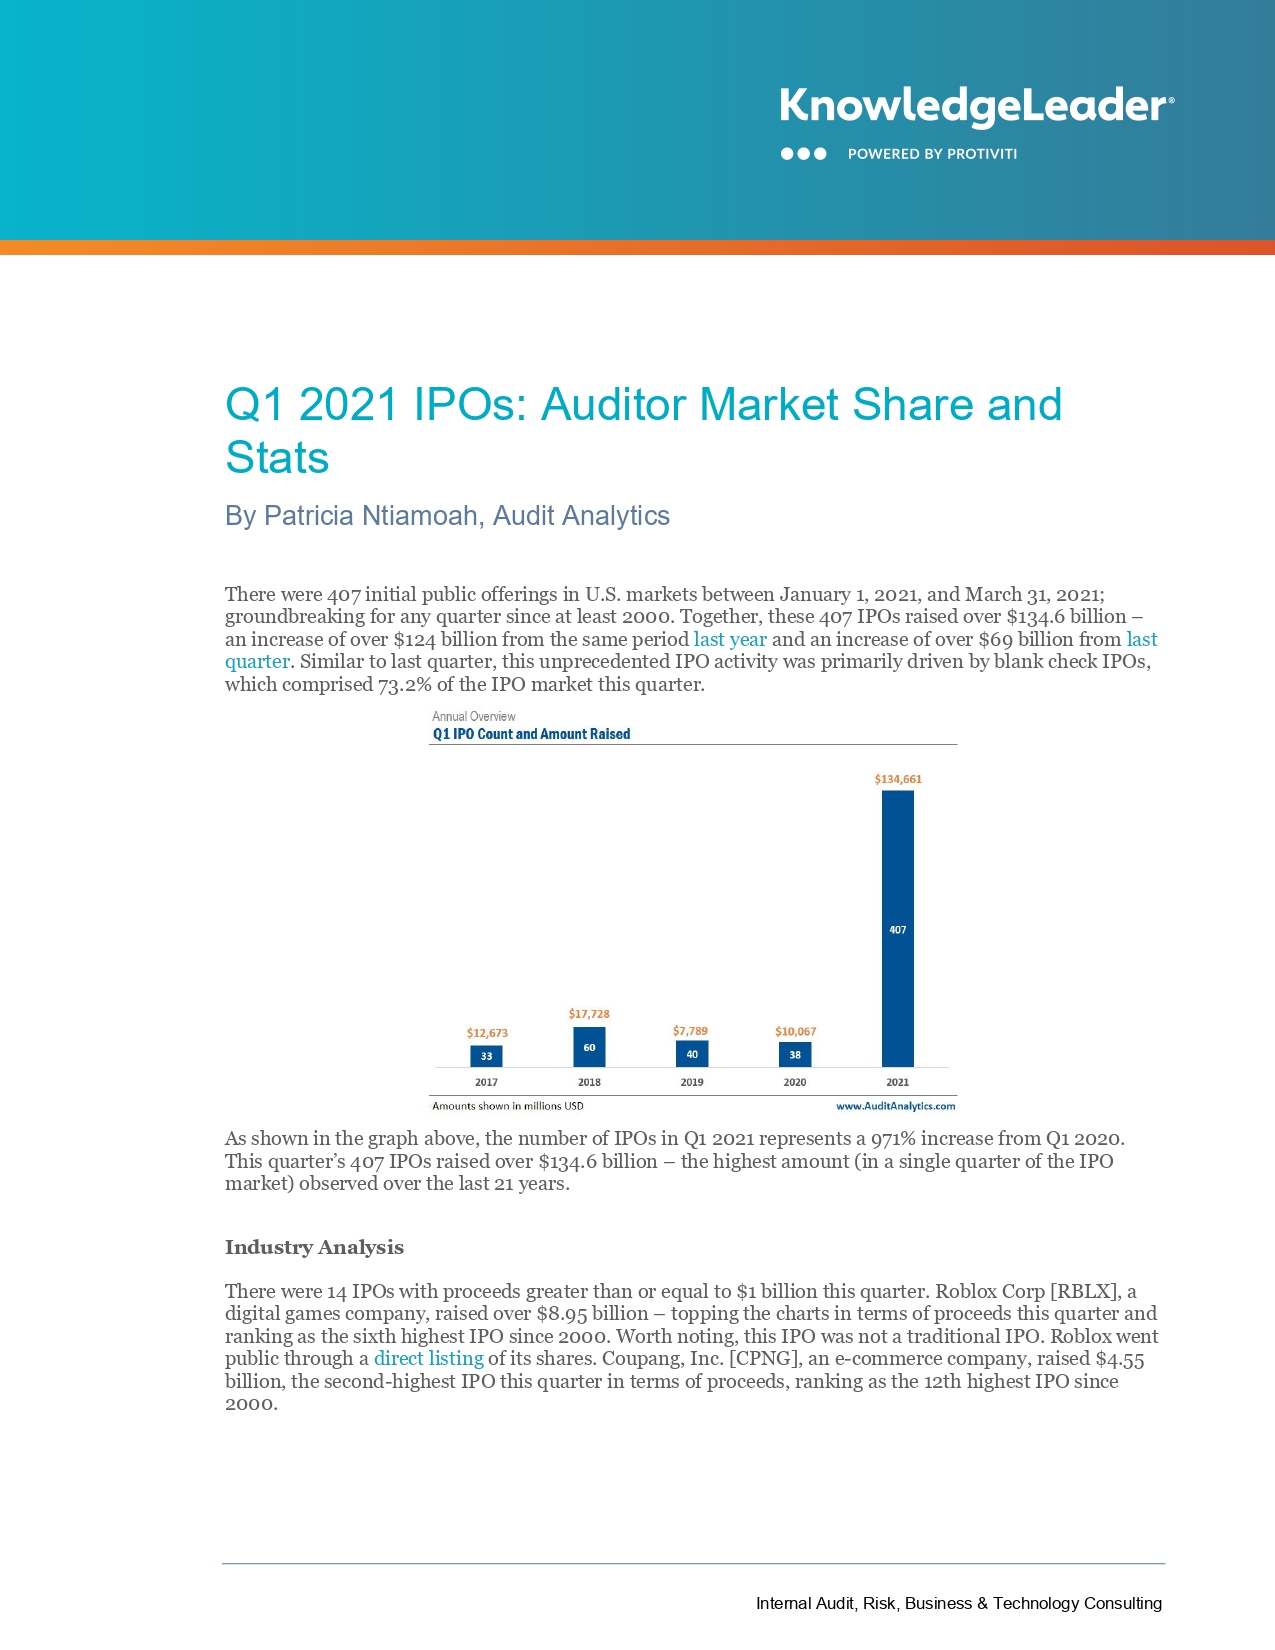 Q1 2021 IPOs Auditor Market Share and Stats